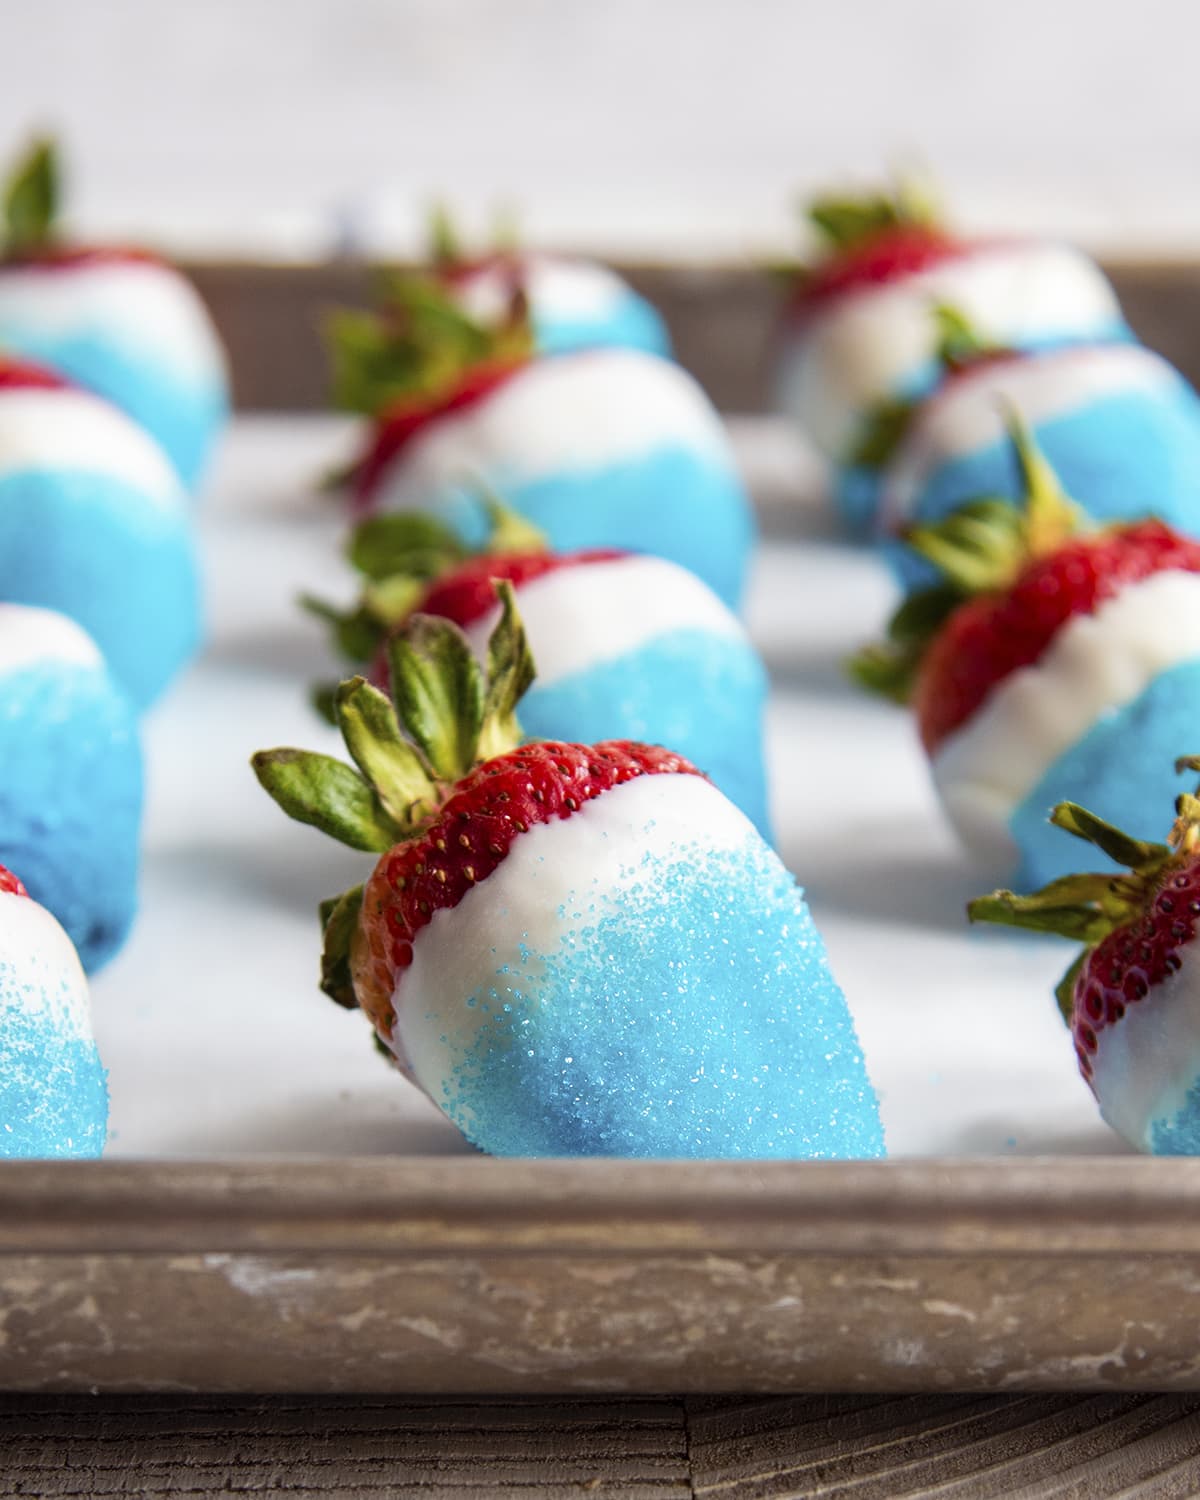 Rows of strawberries dipped in white chocolate, and blue sparkling sugar.